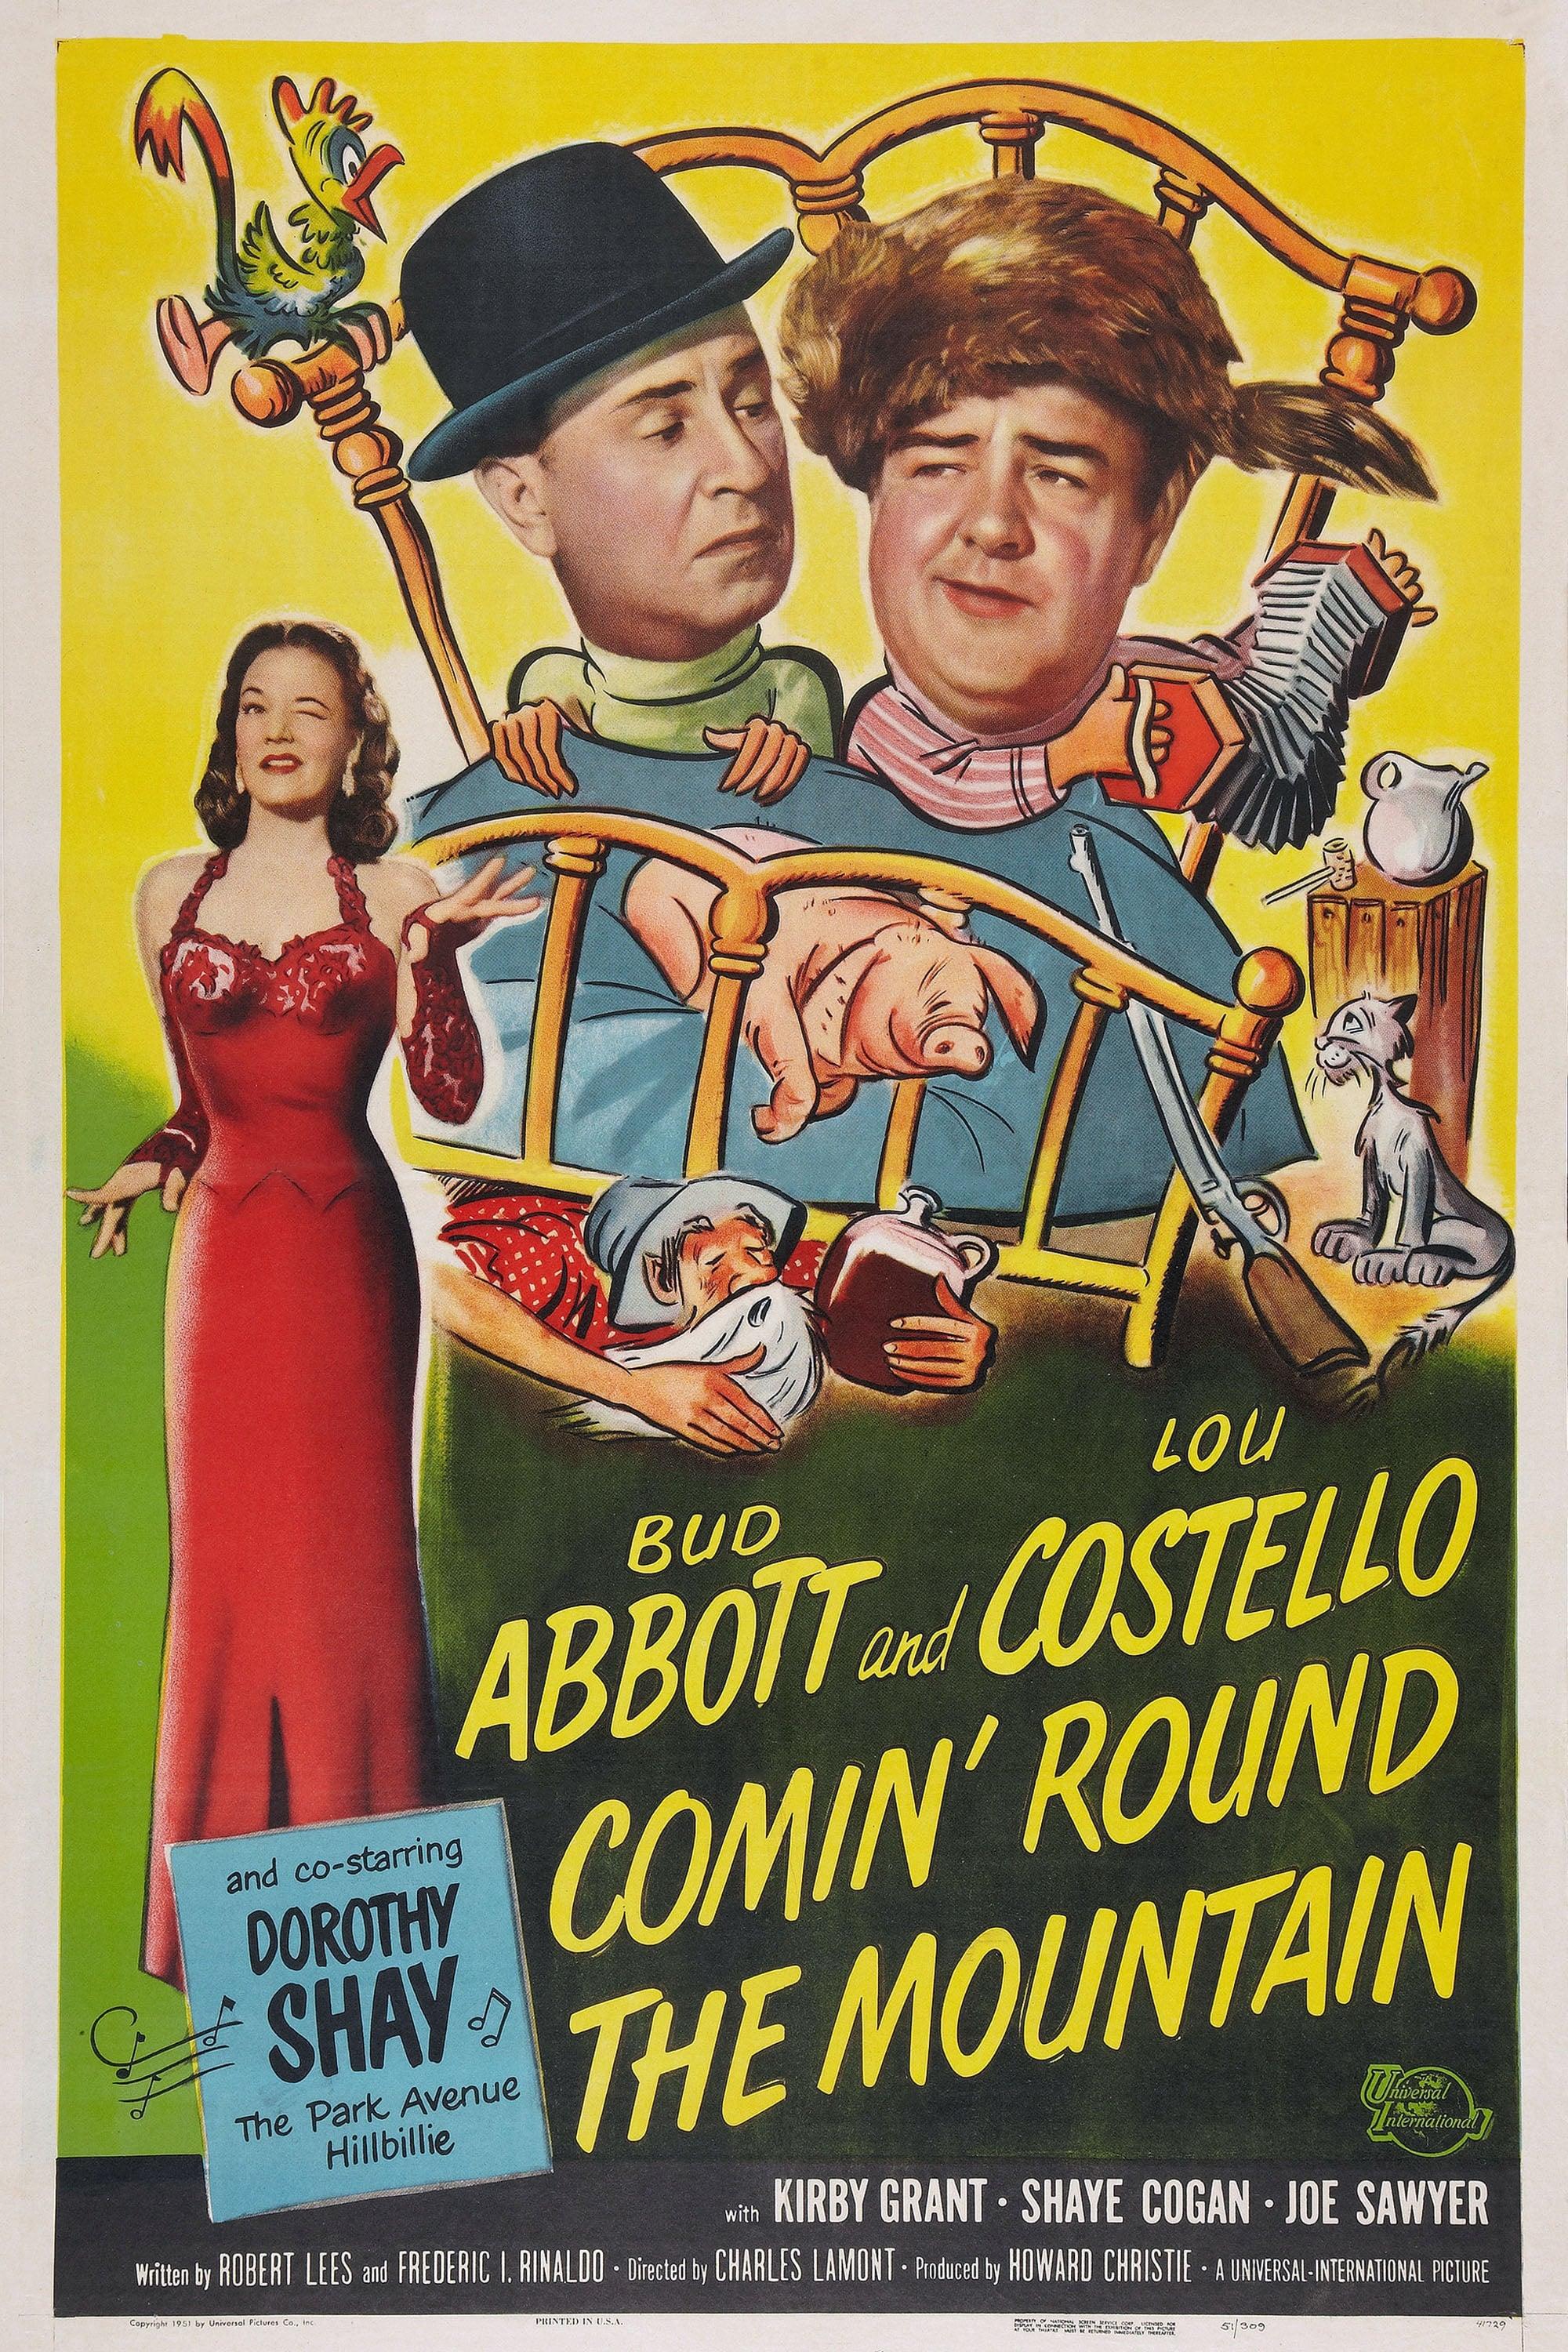 Comin' Round the Mountain poster